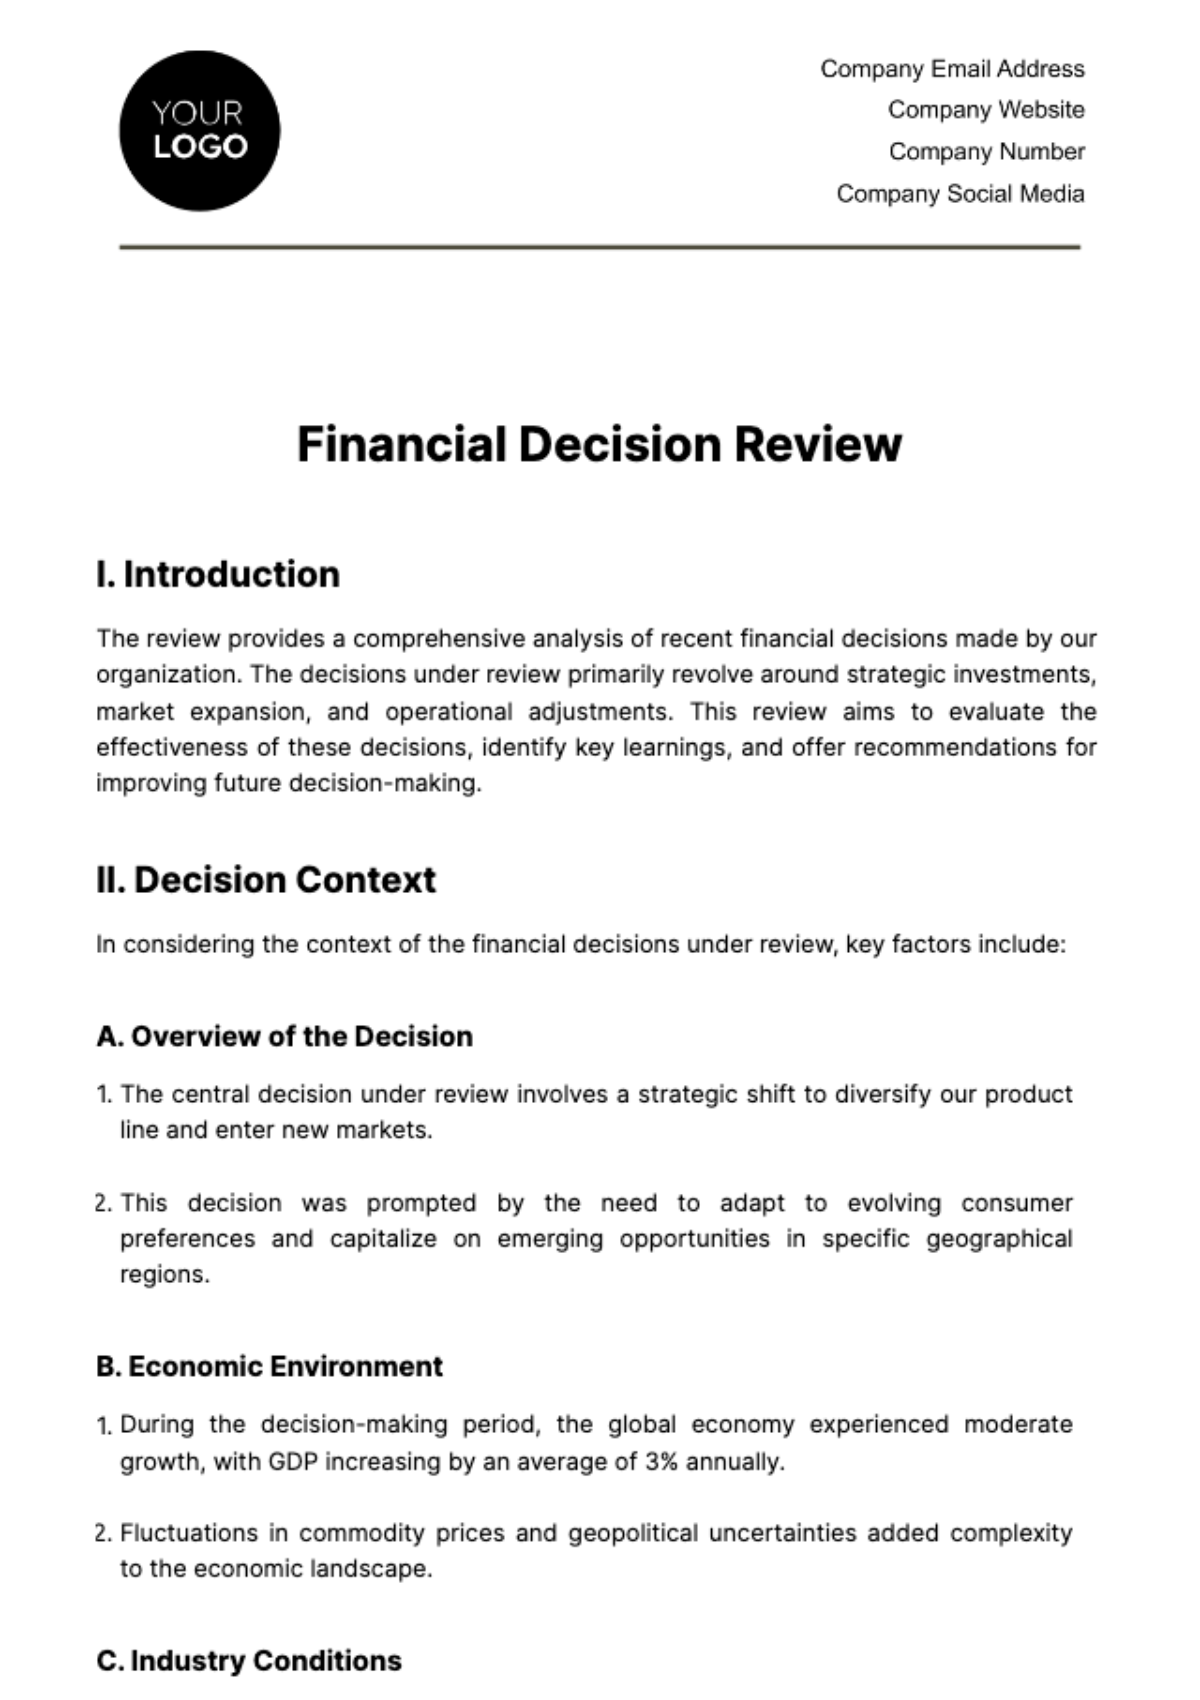 Free Financial Decision Review Template